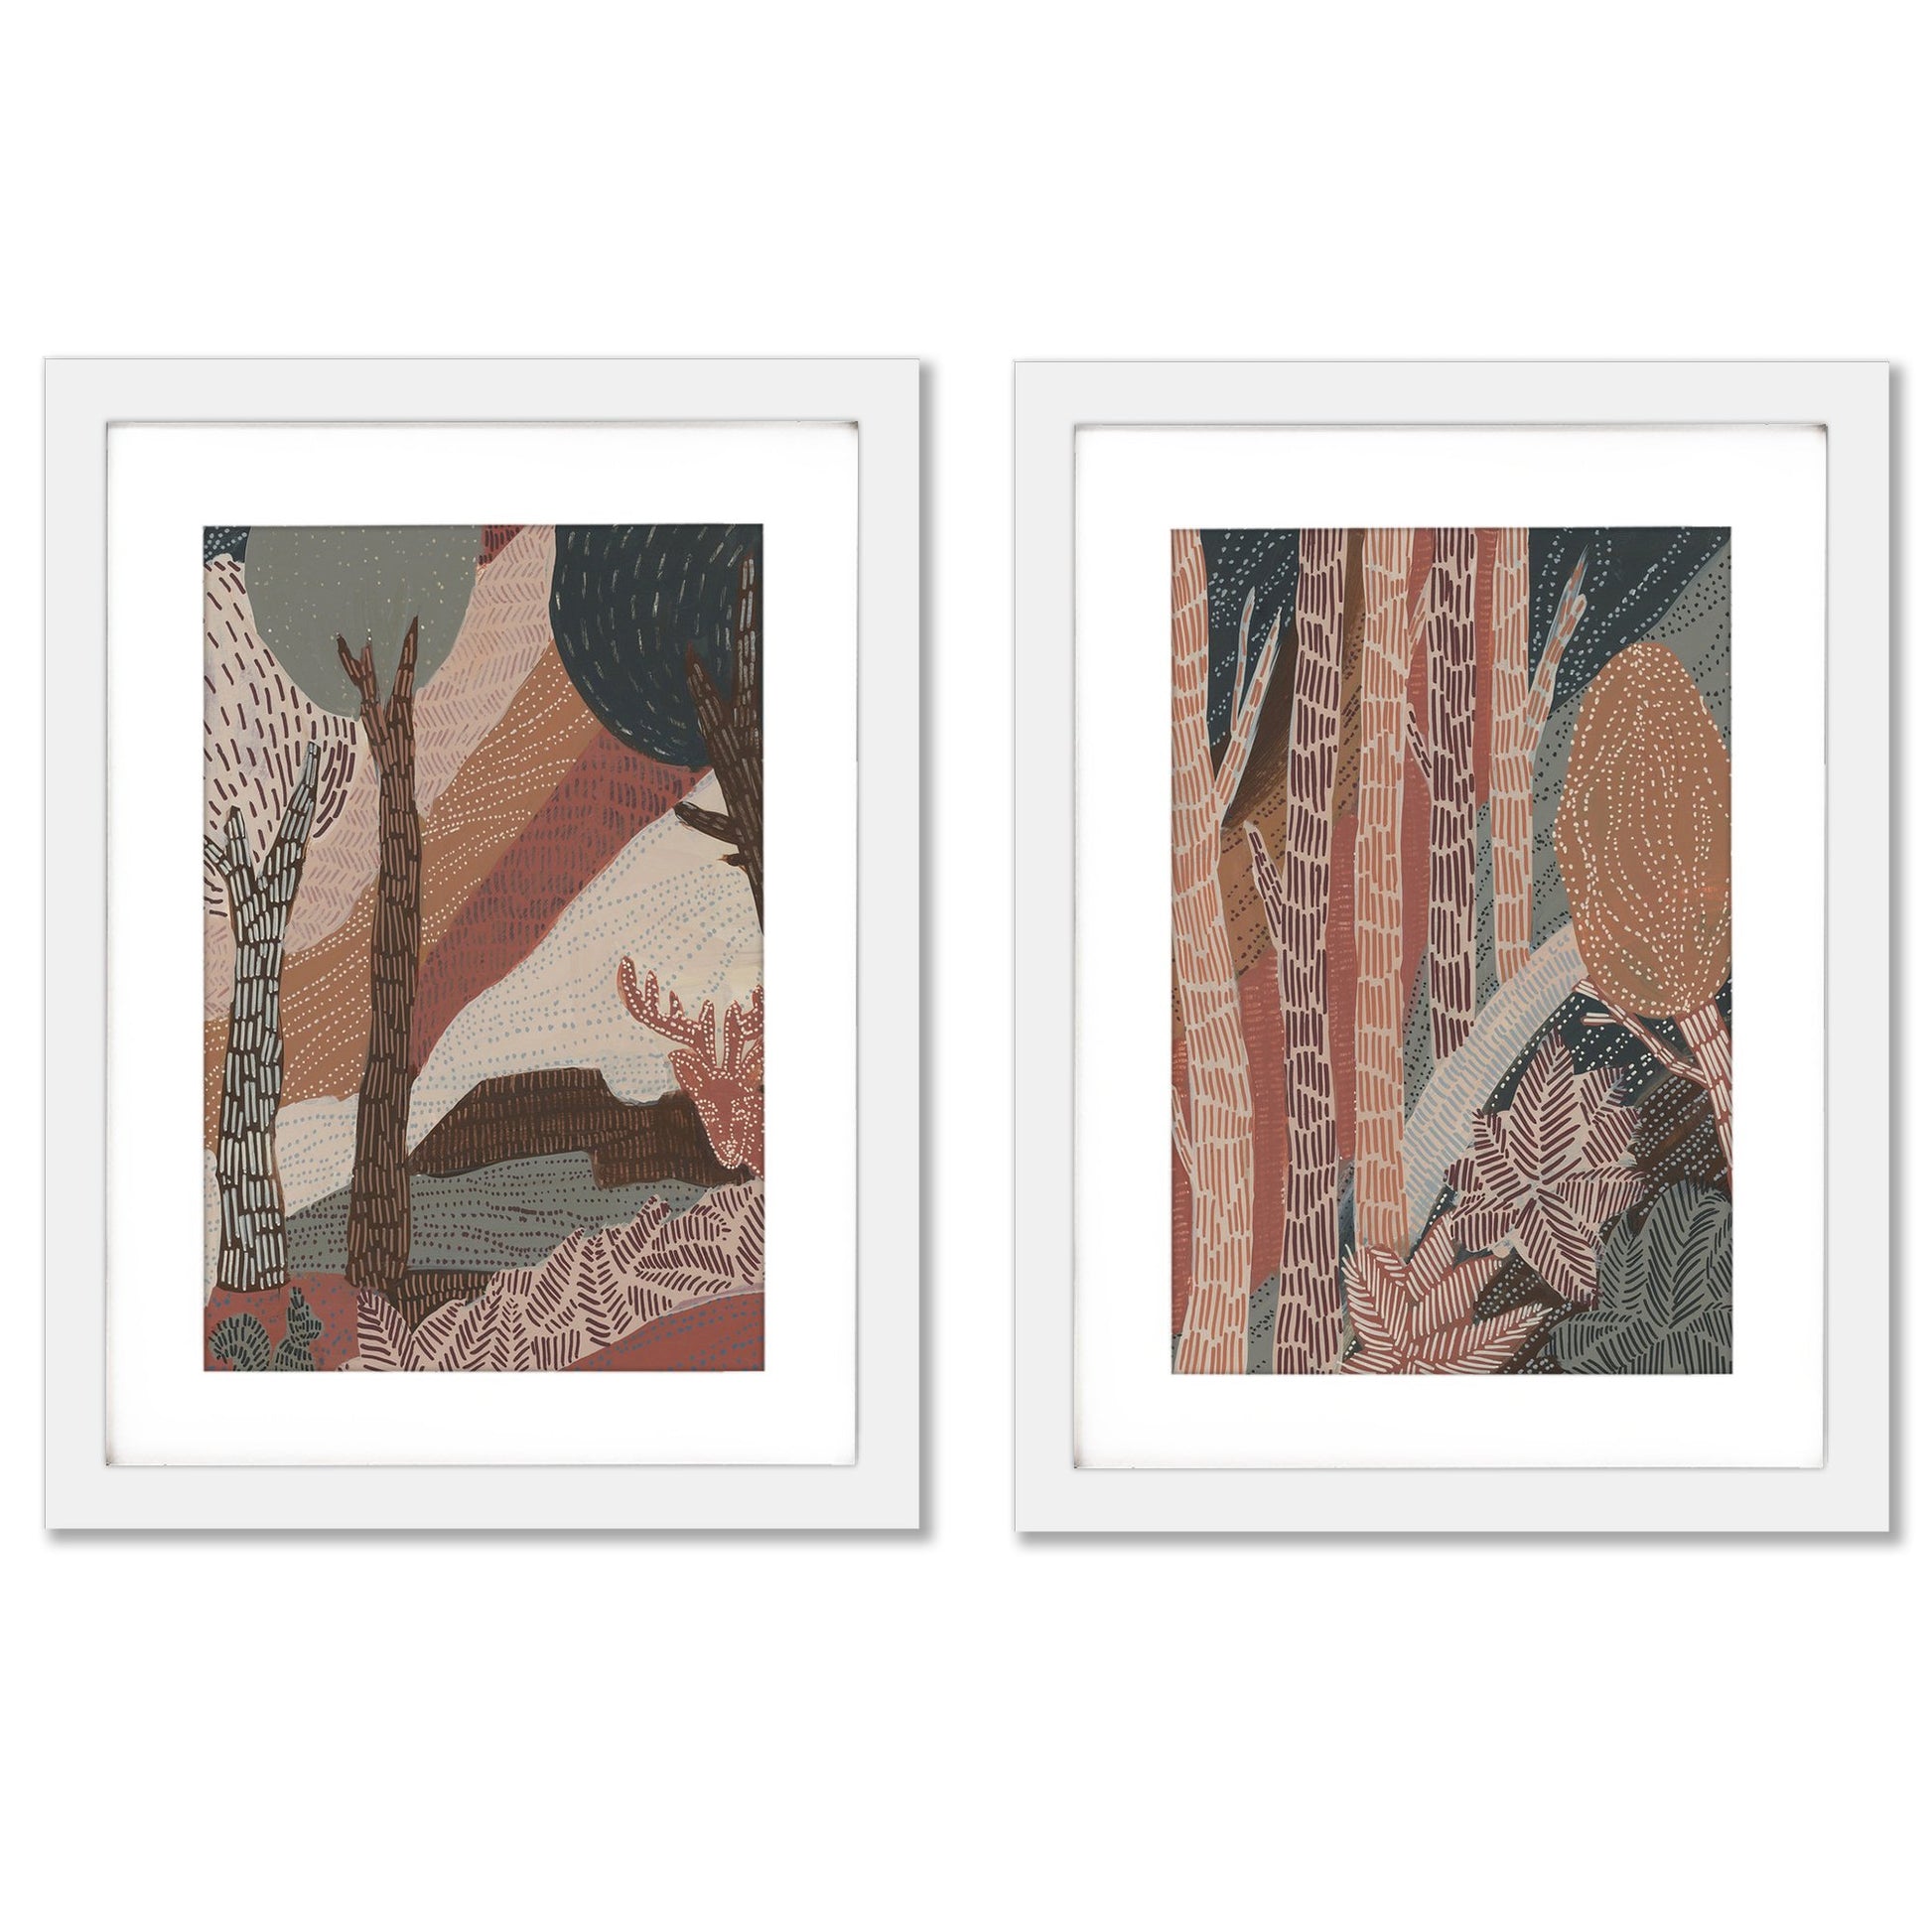 Nordic Woodlands by Jetty Home - 2 Piece Gallery Framed Print Art Set - Americanflat